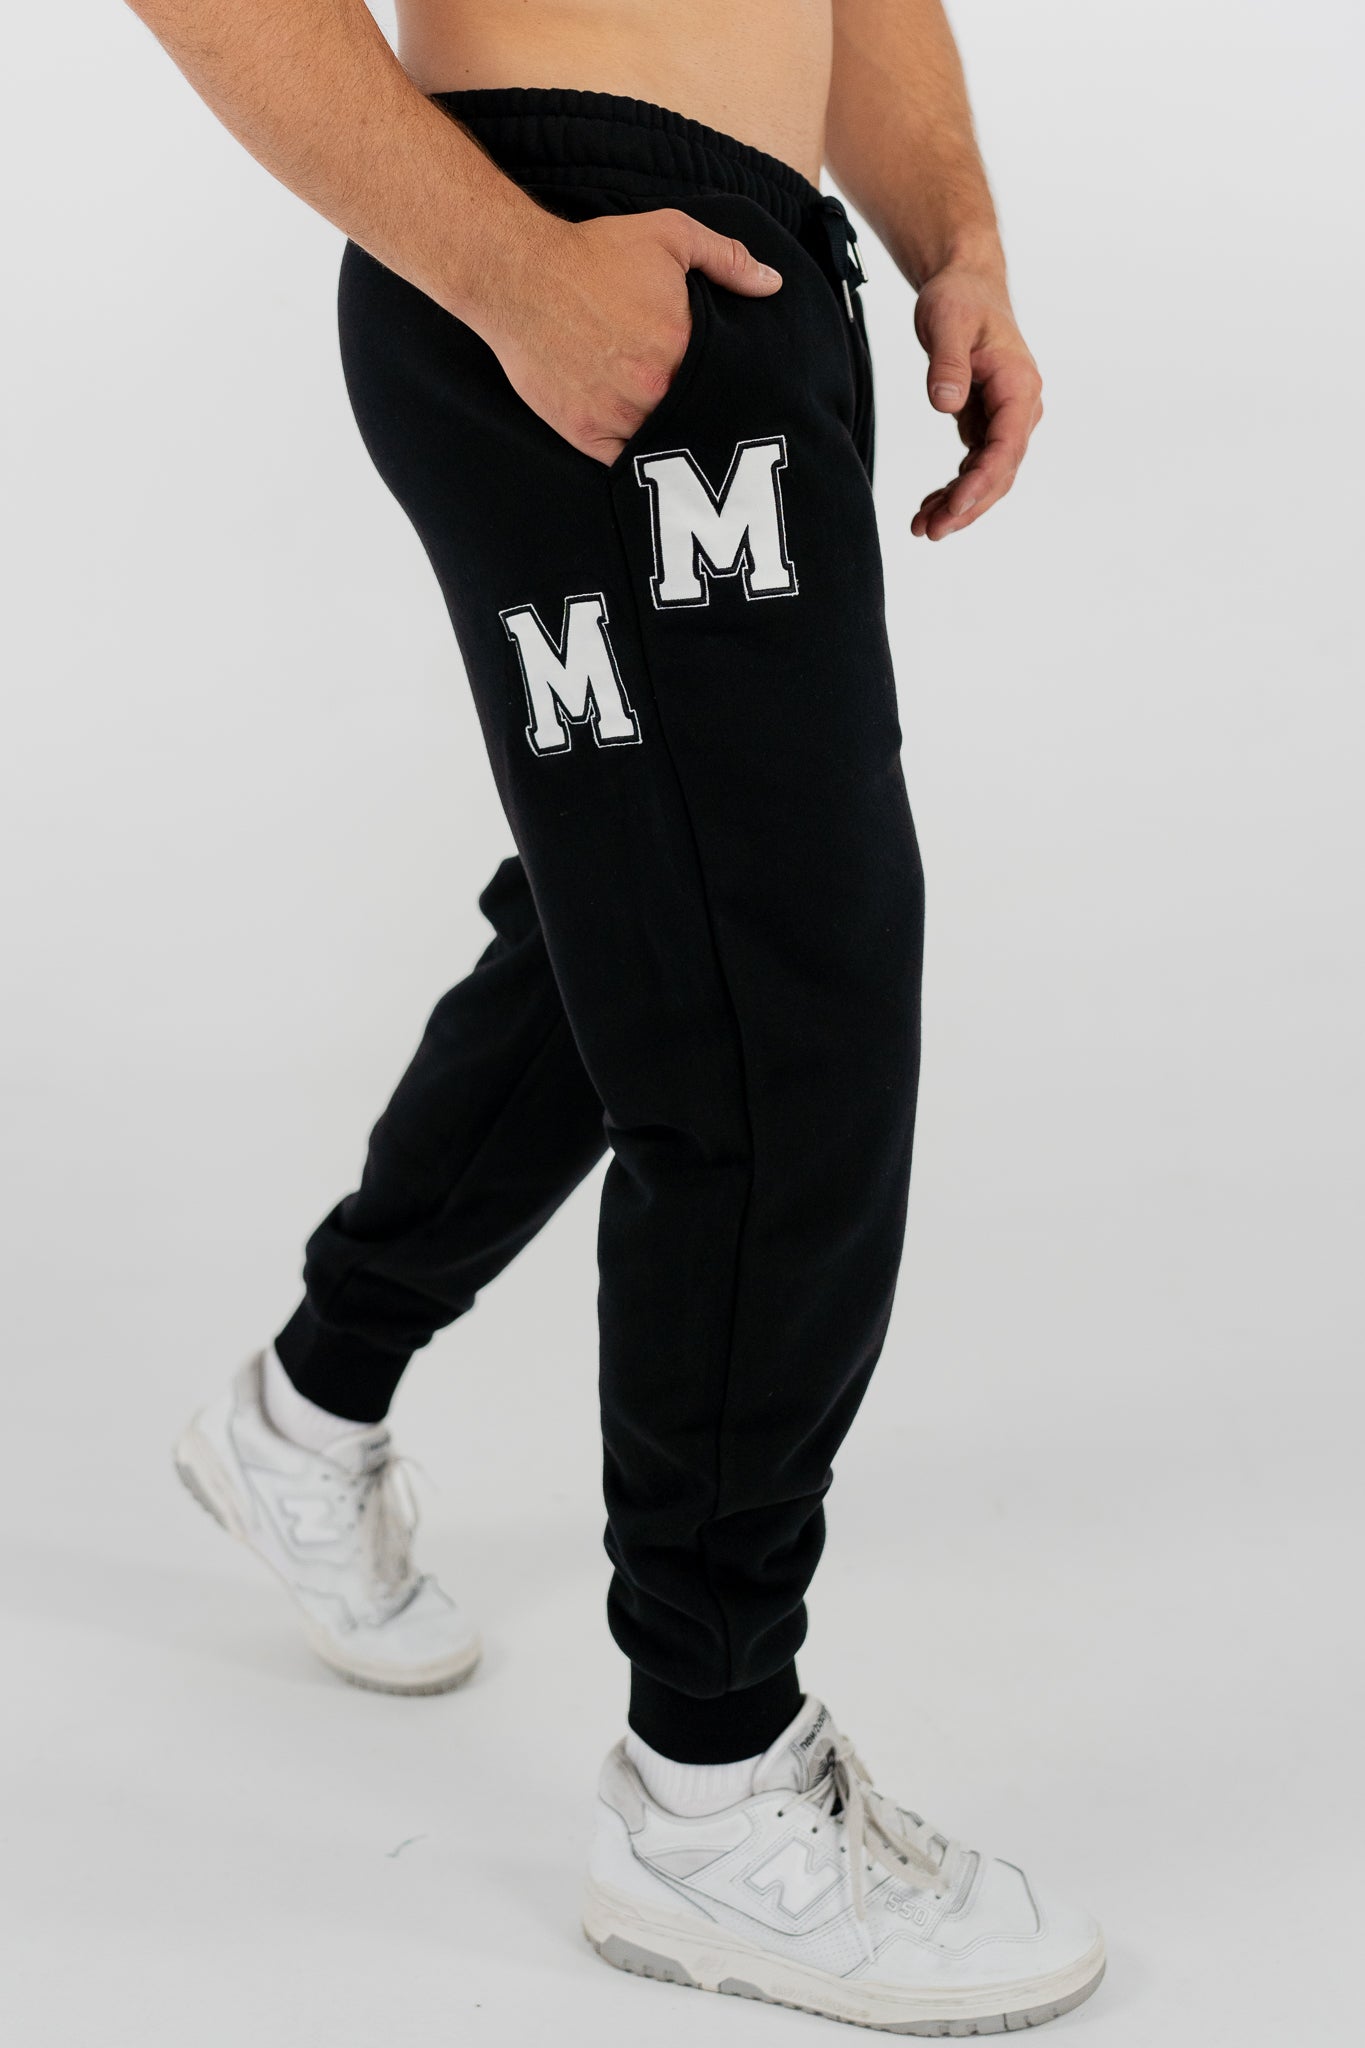 MM TRACKPANT IN BLACK